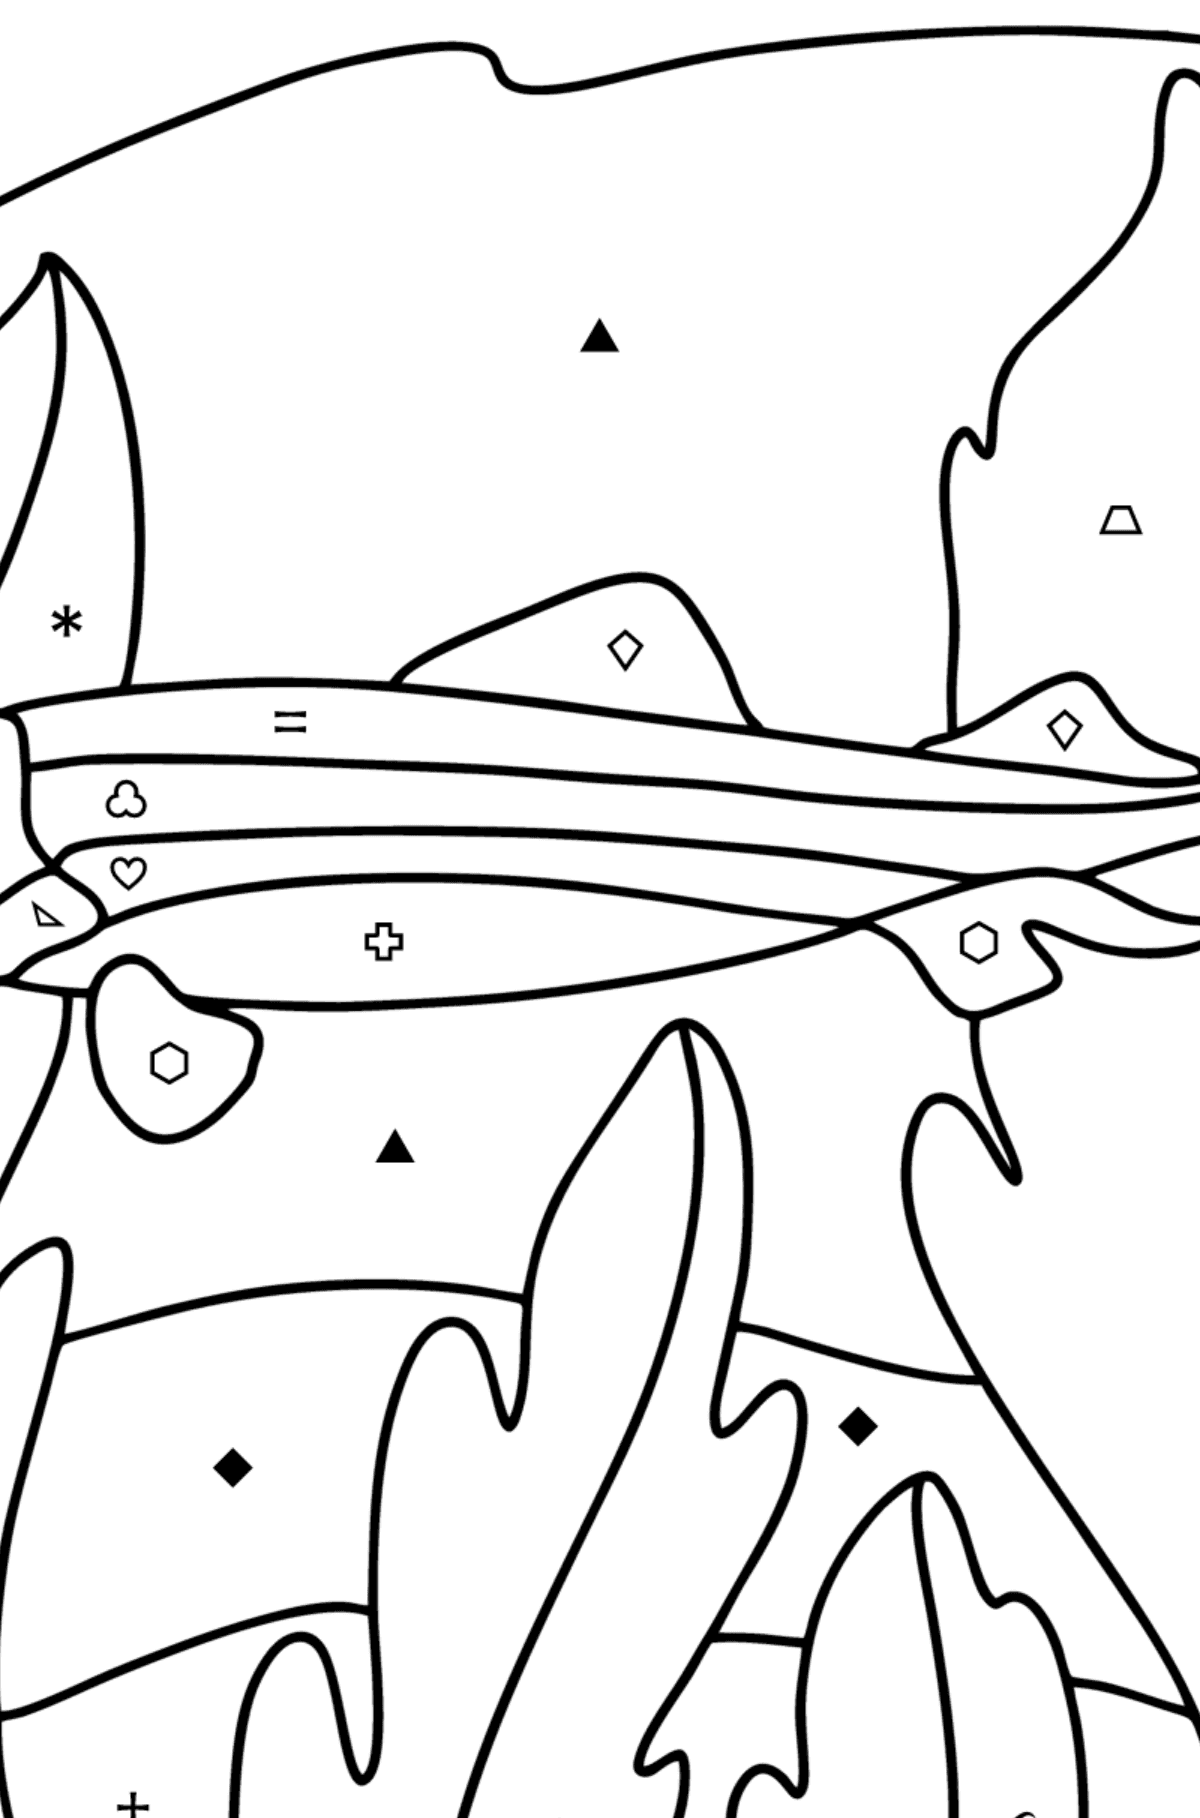 Crocodile Shark coloring page - Coloring by Symbols and Geometric Shapes for Kids